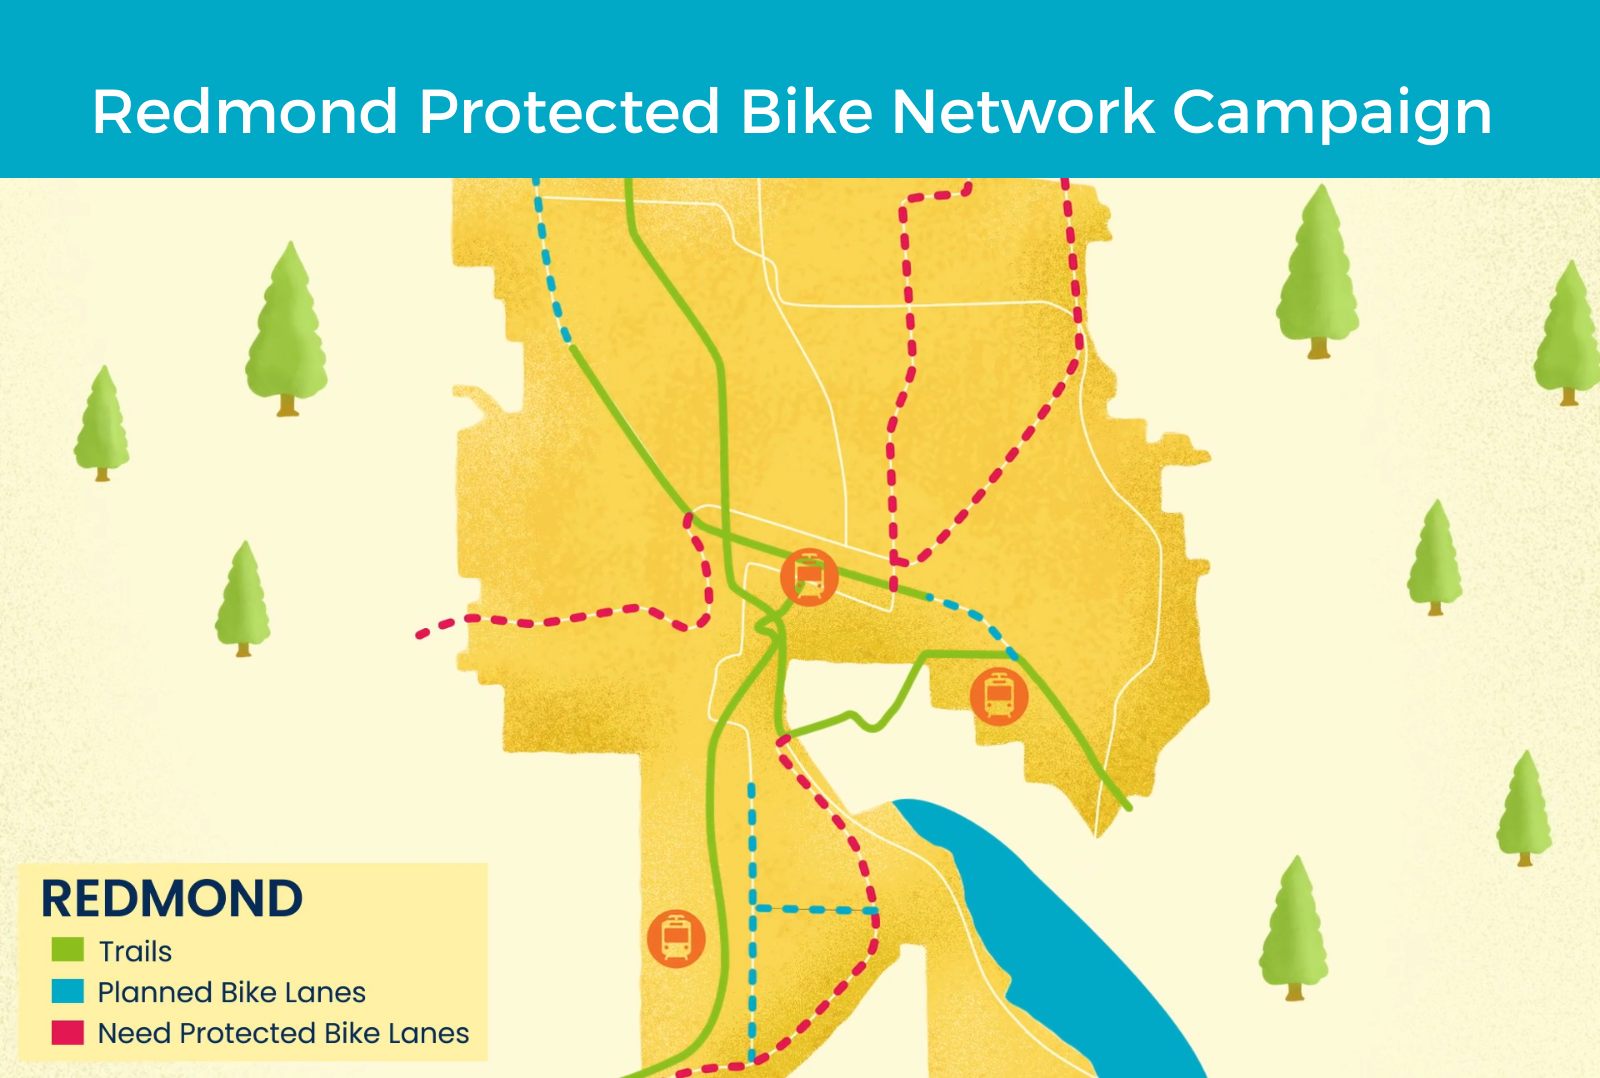 Illustrated map of Redmond marking out trails in green, planned bike lanes in blue, and needed bike lanes in red.